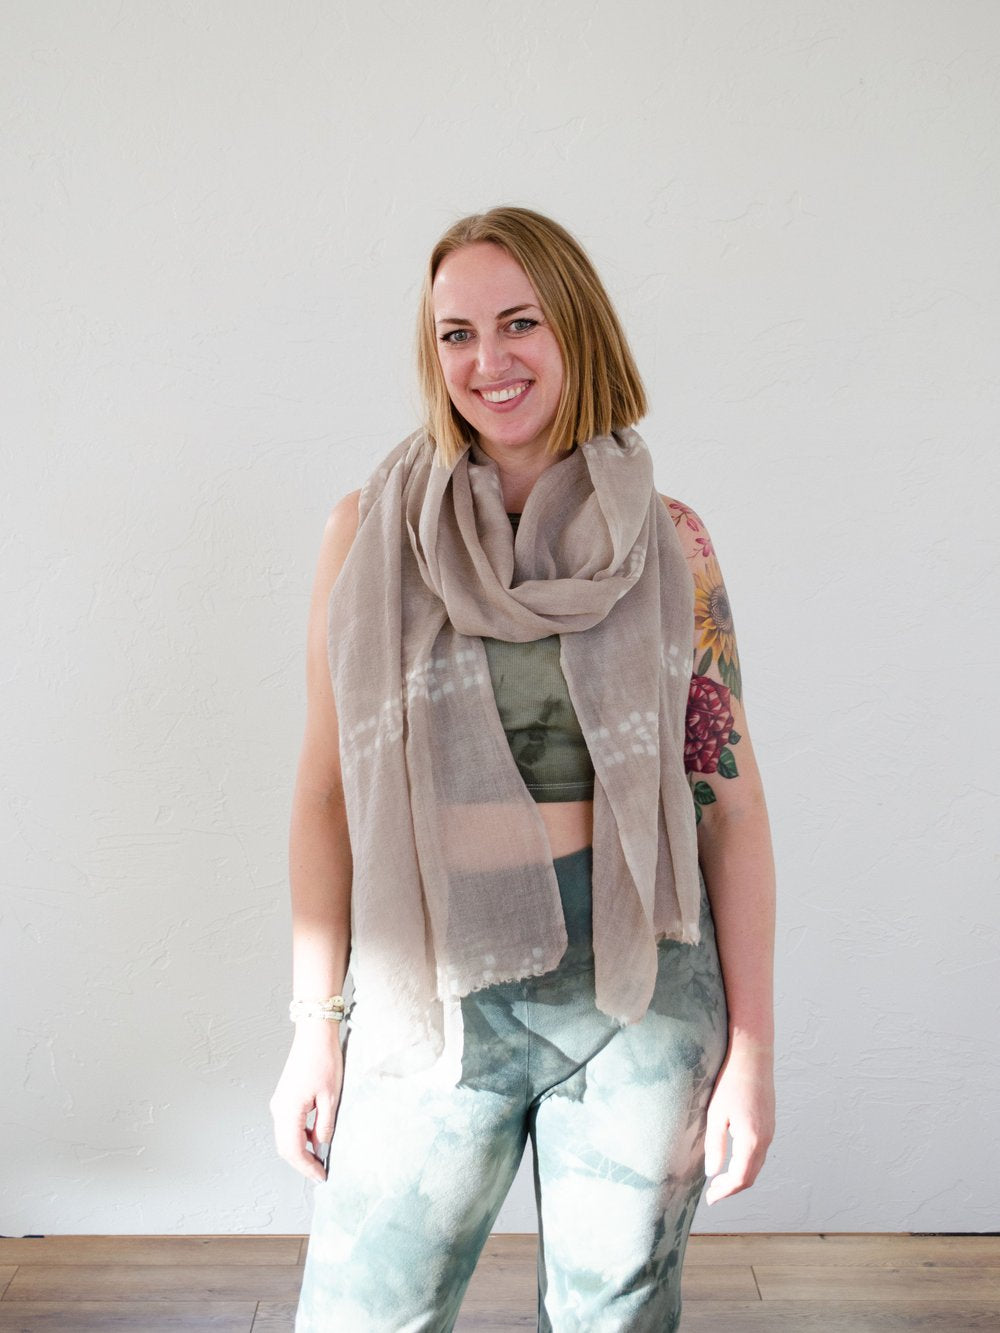 Patterned One-of-a-Kind Hand-Dyed Wool Gauze Scarf in Sand Color by 1 Life - Hand-Dyed Wool Scarf for Warm or Cold Weather